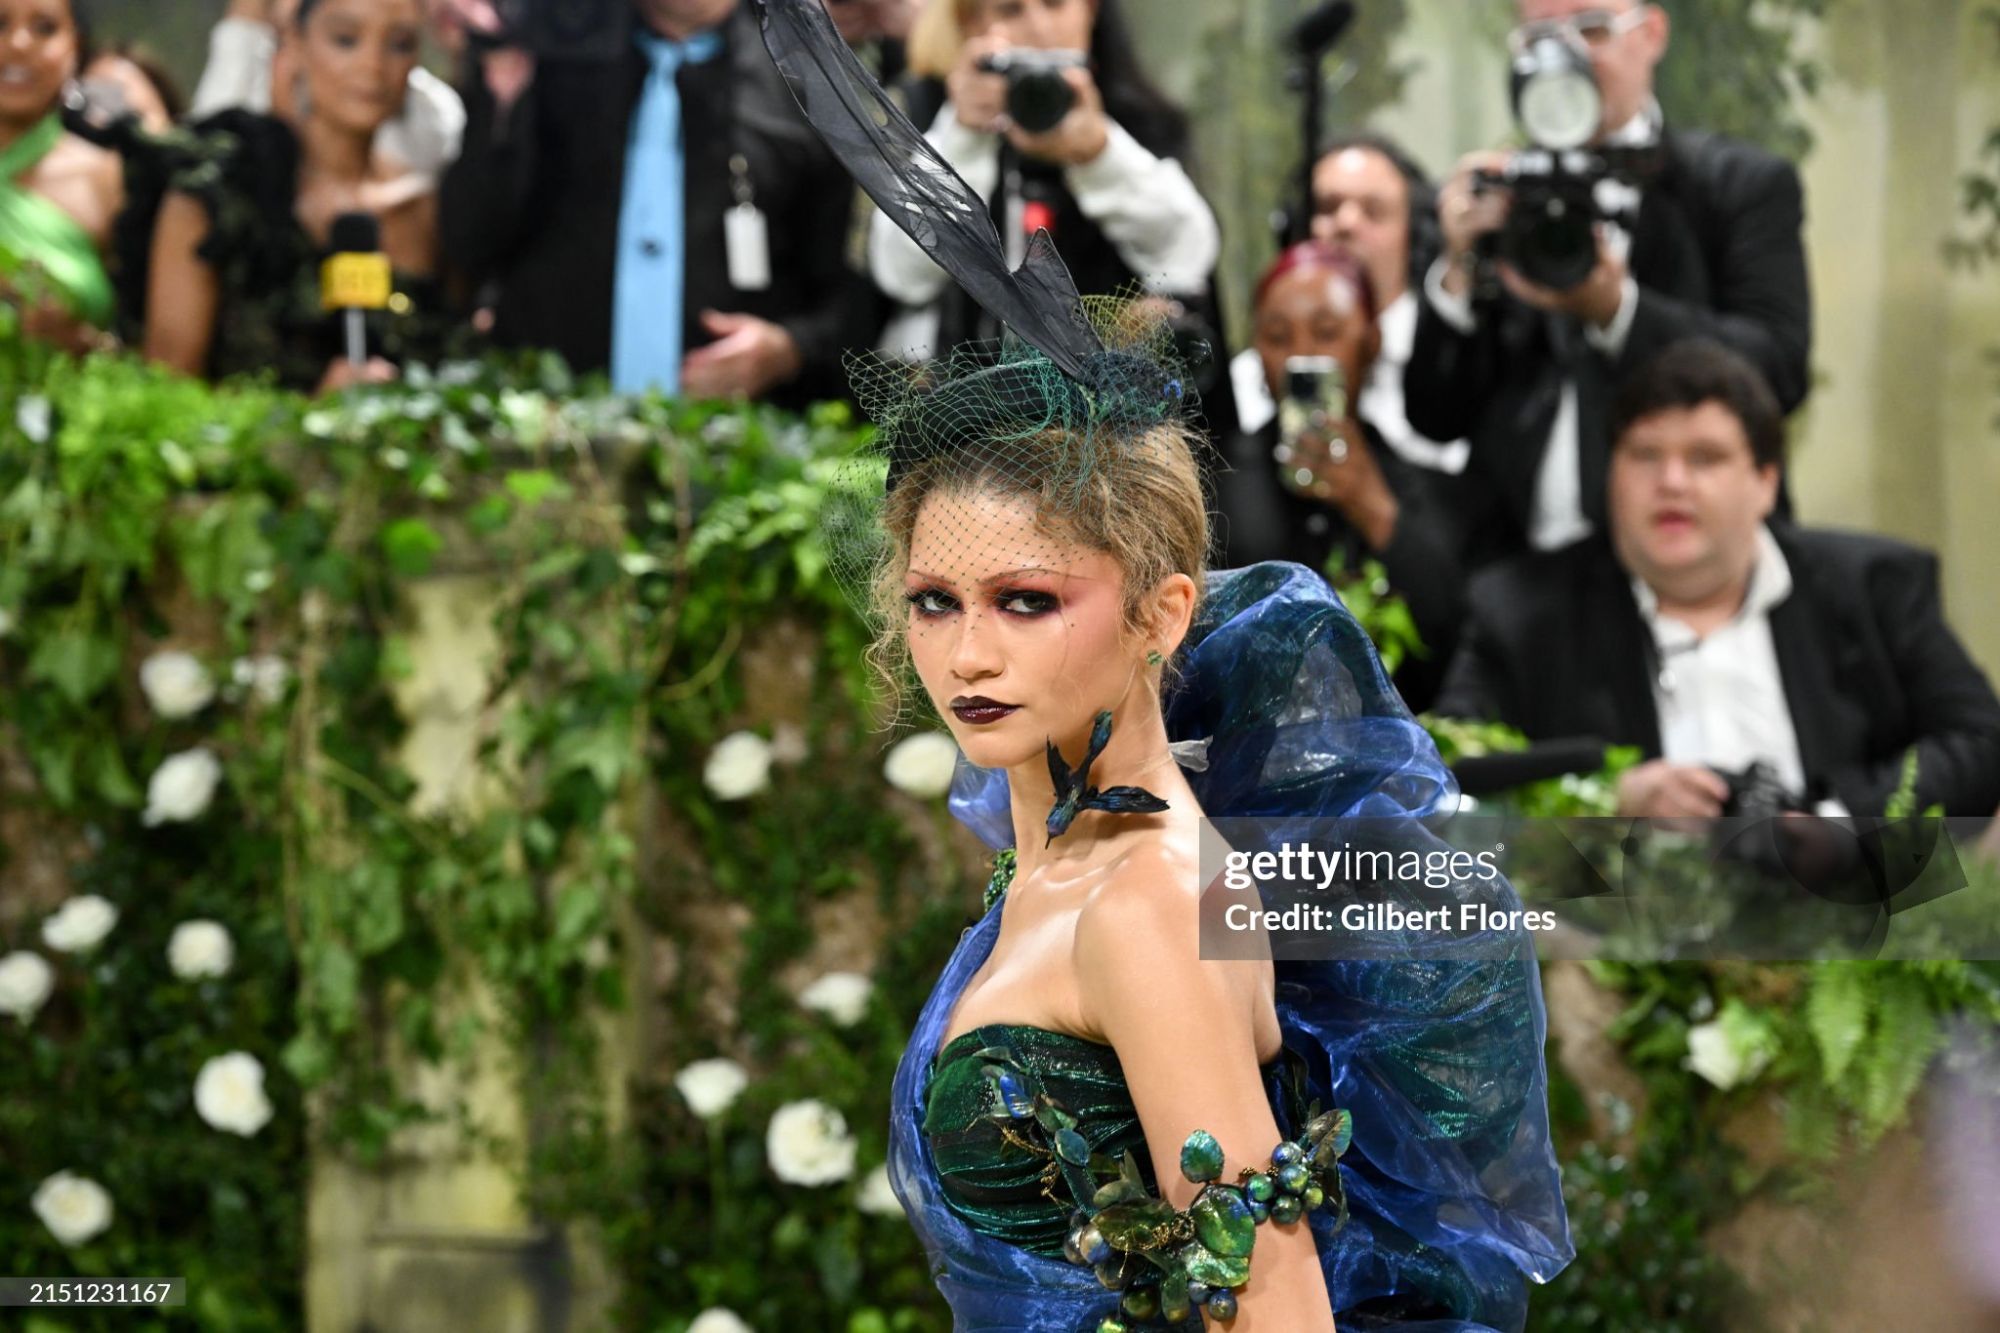 gettyimages-2151231167-2048x2048.jpg